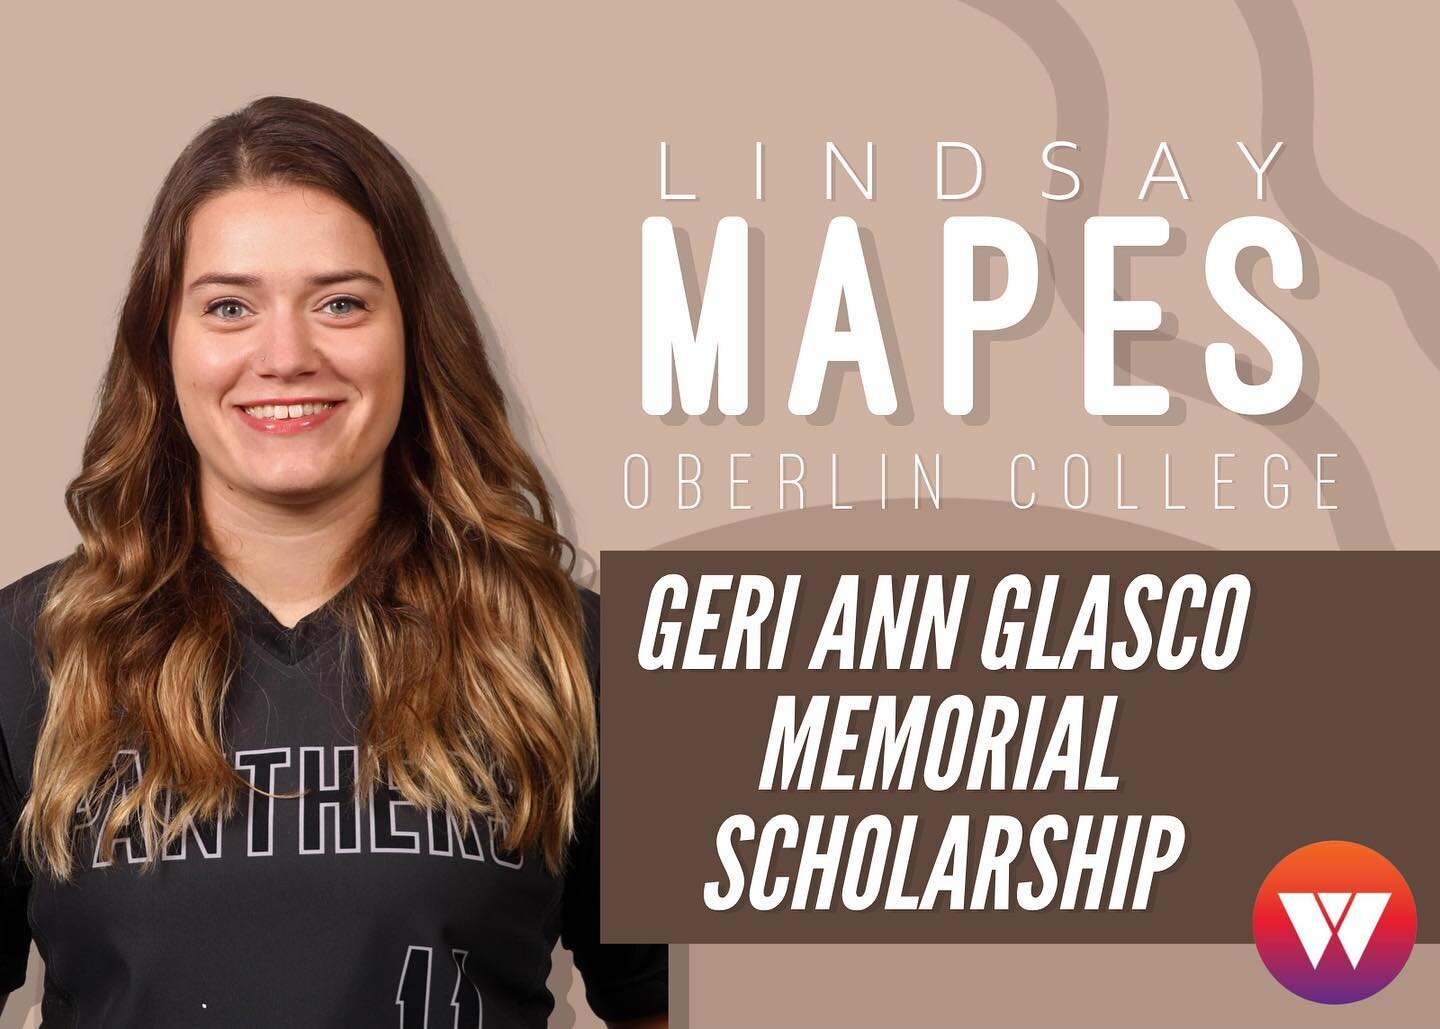 Congratulations to Oberlin College&rsquo;s assistant coach, Lindsay Mapes, who is this years Geri Ann Glasco Memorial Scholarship in partner with @wecoachsports winner!!✨🤎

The Geri Ann Glasco memorial scholarship is awarded to one female assistant 